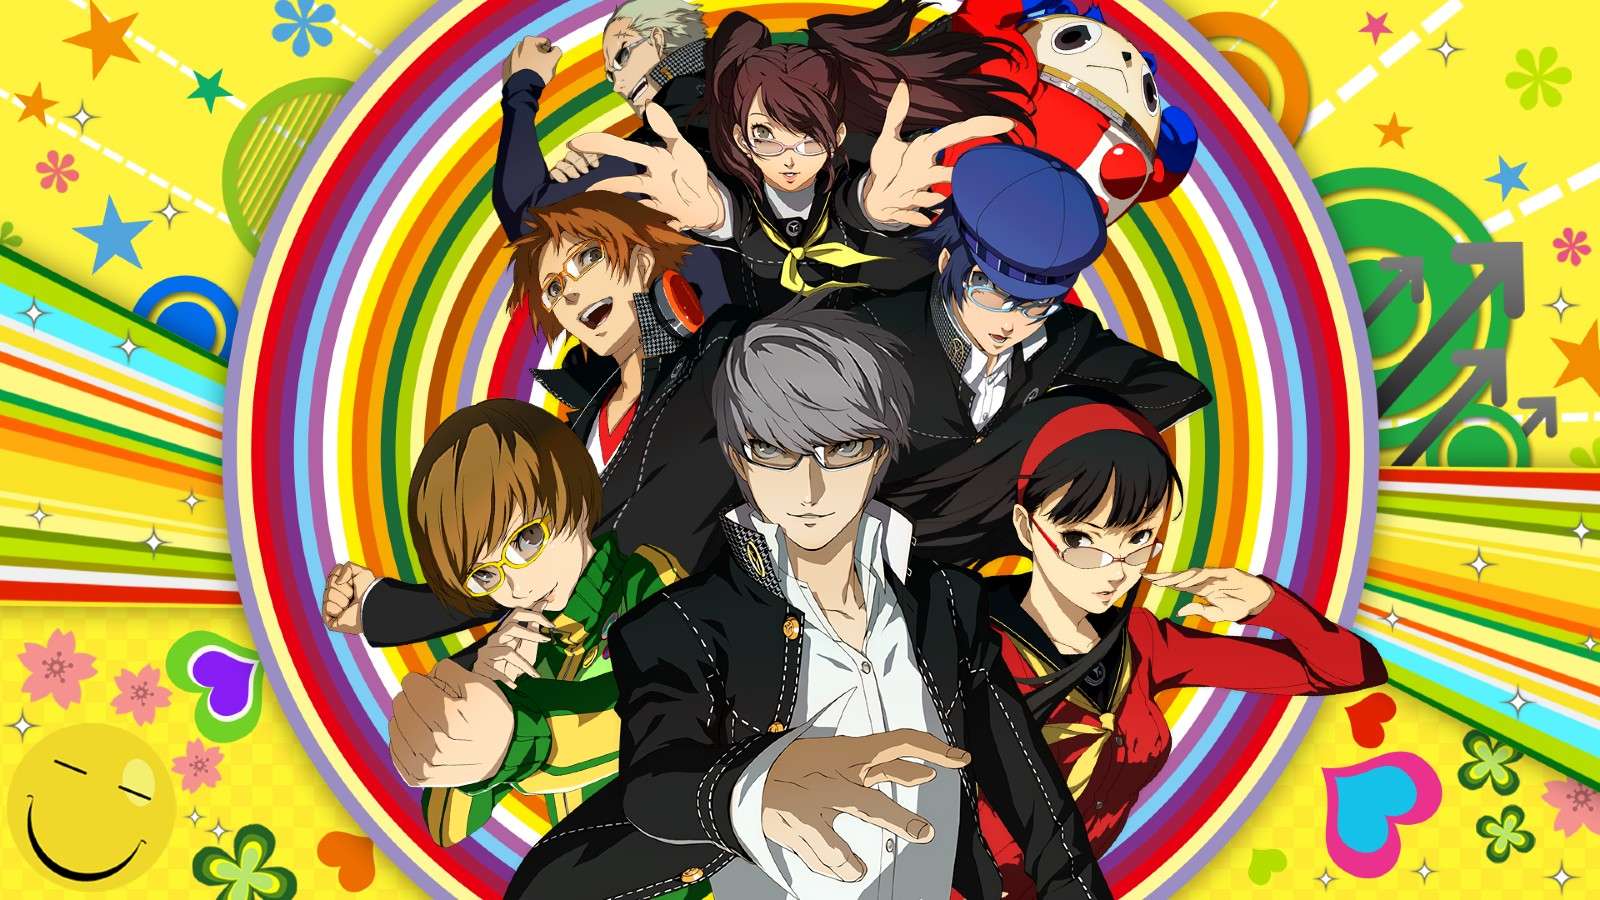 An official image of Persona 4 Golden artwork.